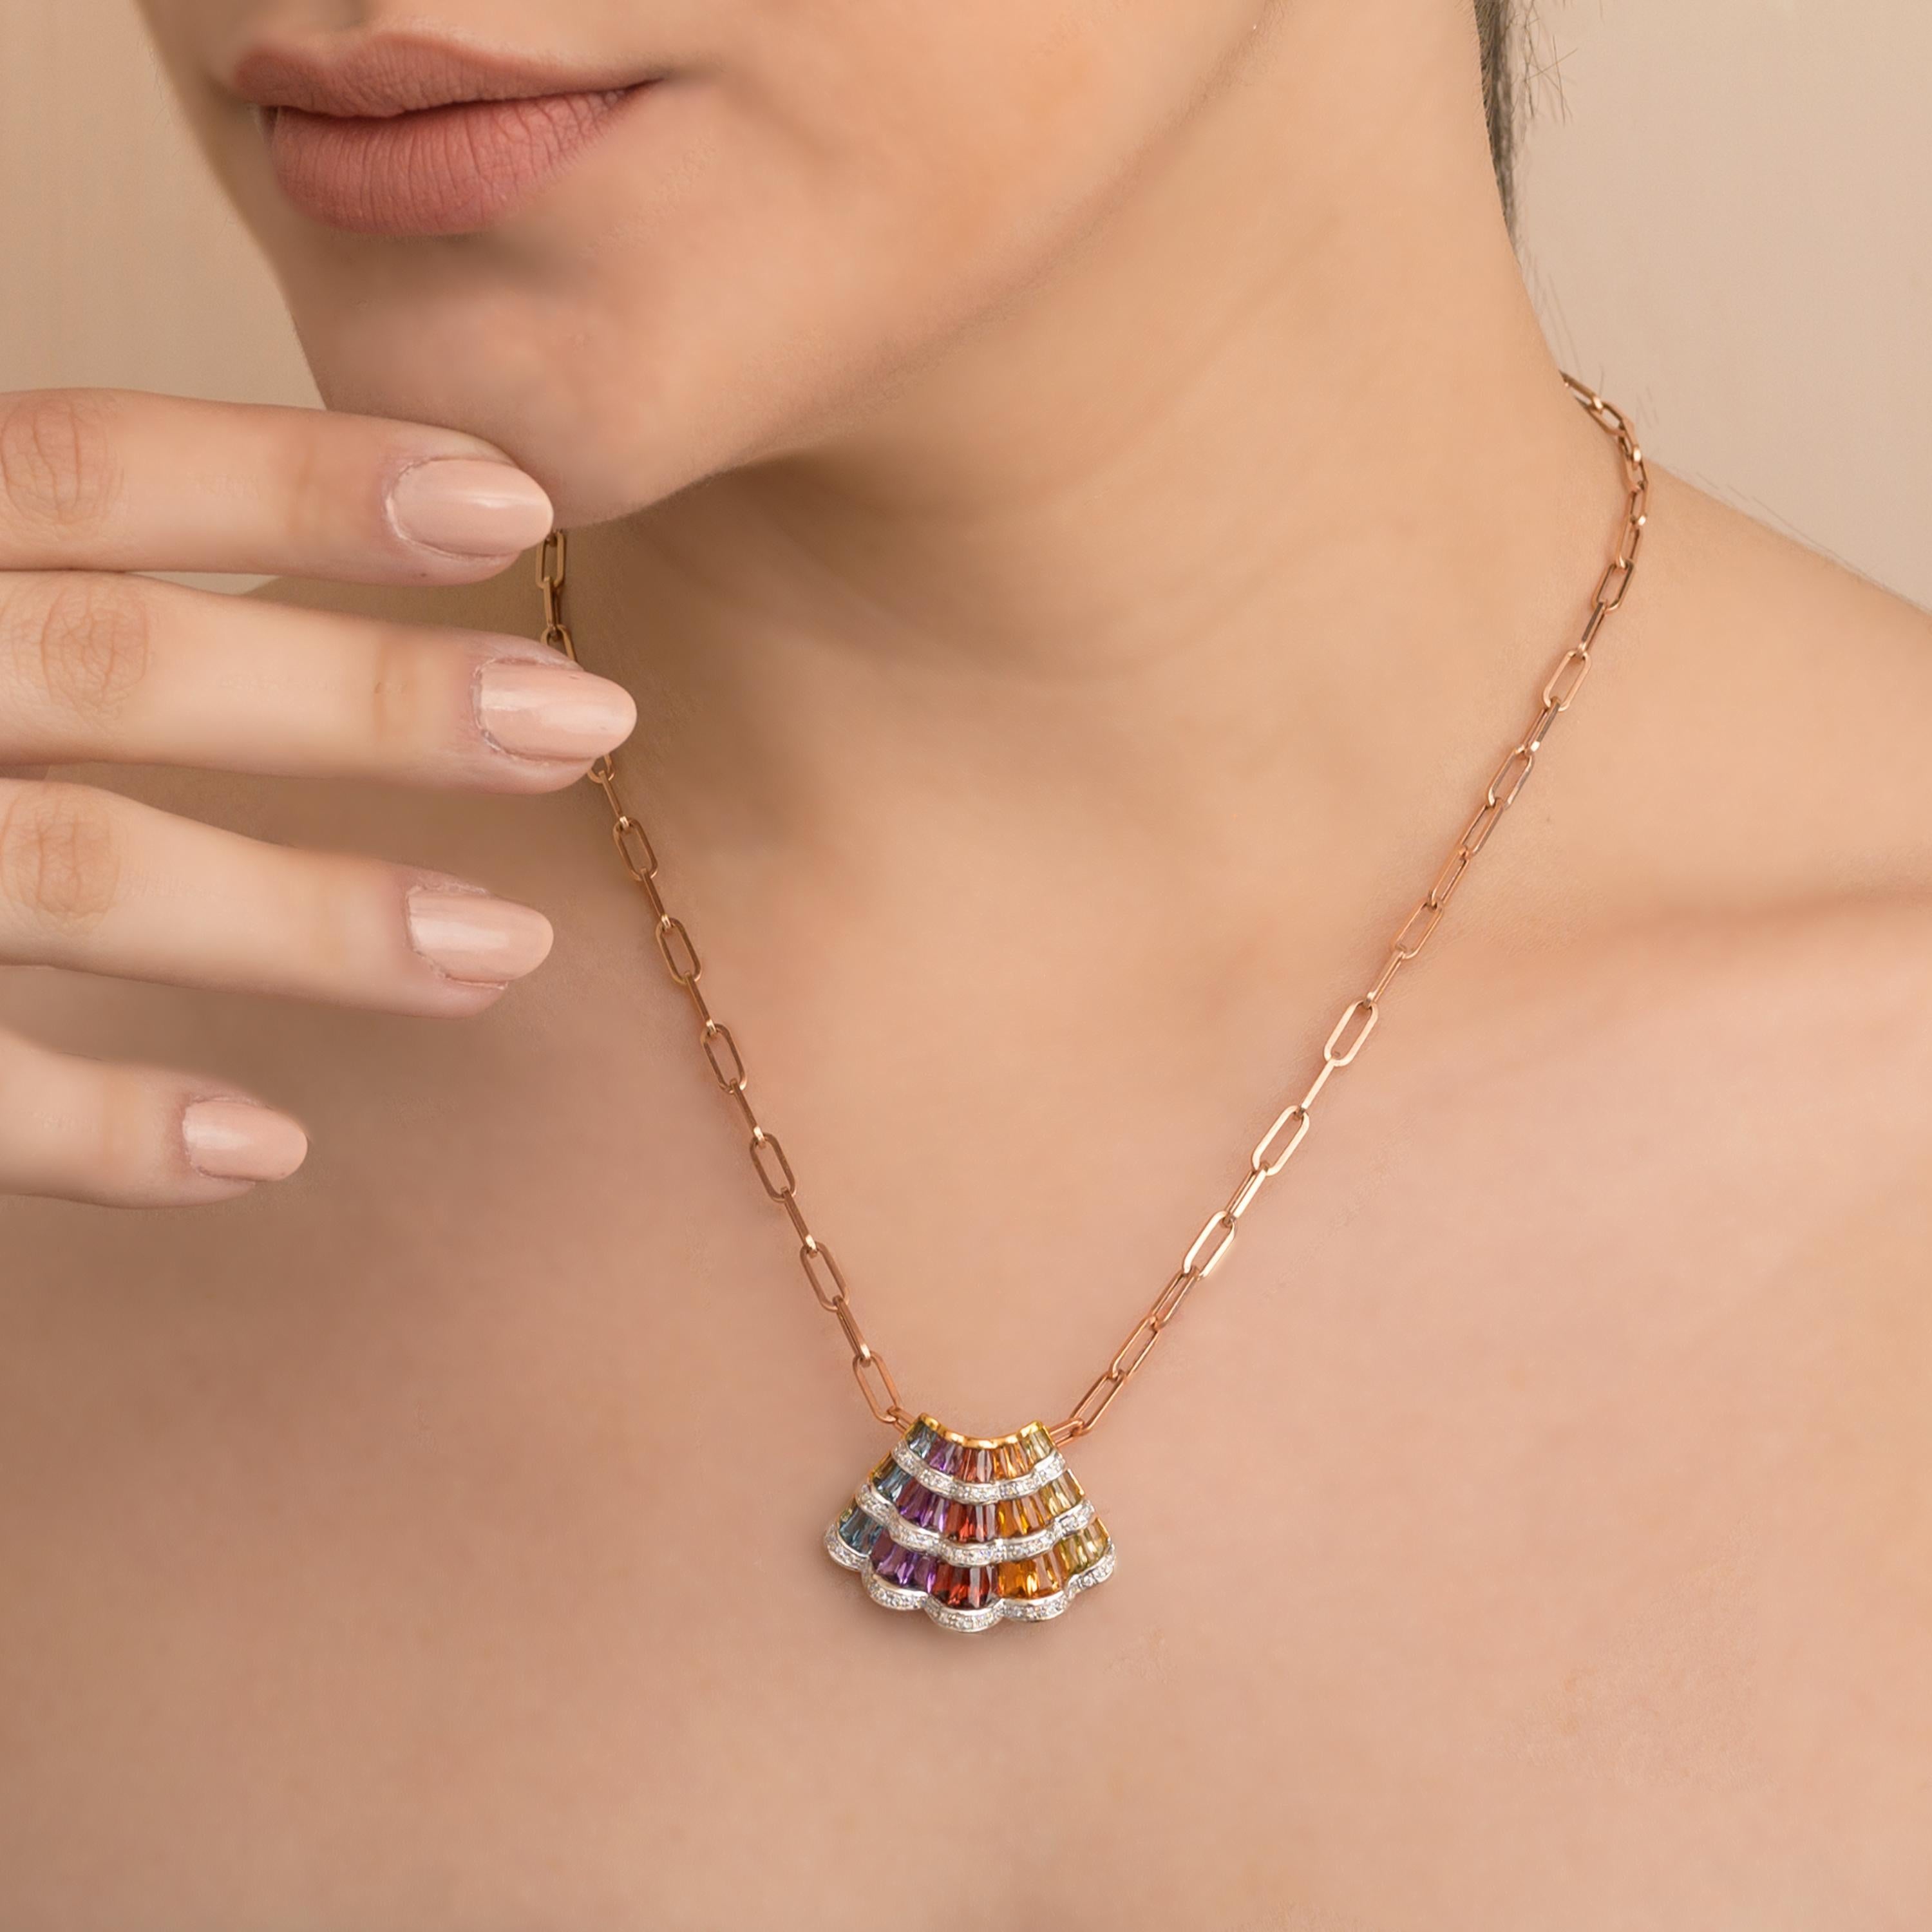 18 karat yellow gold rainbow multicolour gemstone contemporary pendant necklace

Absolutely stunning, this rainbow gemstones wing pendant necklace is a graceful embodiment of color and sophistication. This elegant pendant, crafted in fine 18 karat